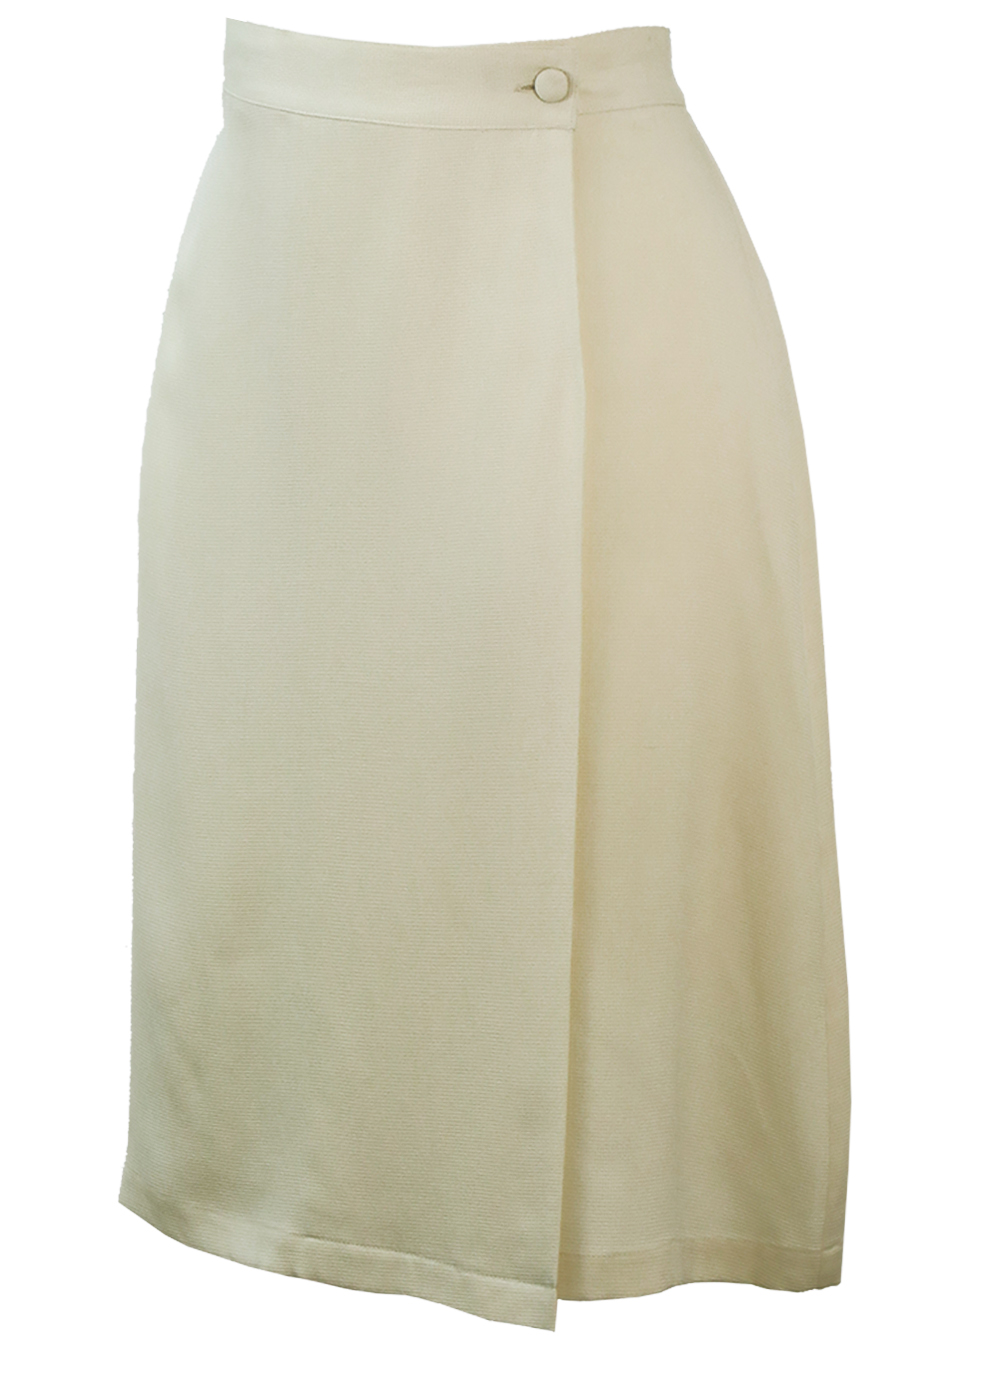 Cream Knee Length Silk Skirt with Wrap Front & Fine Grid Texture - S ...